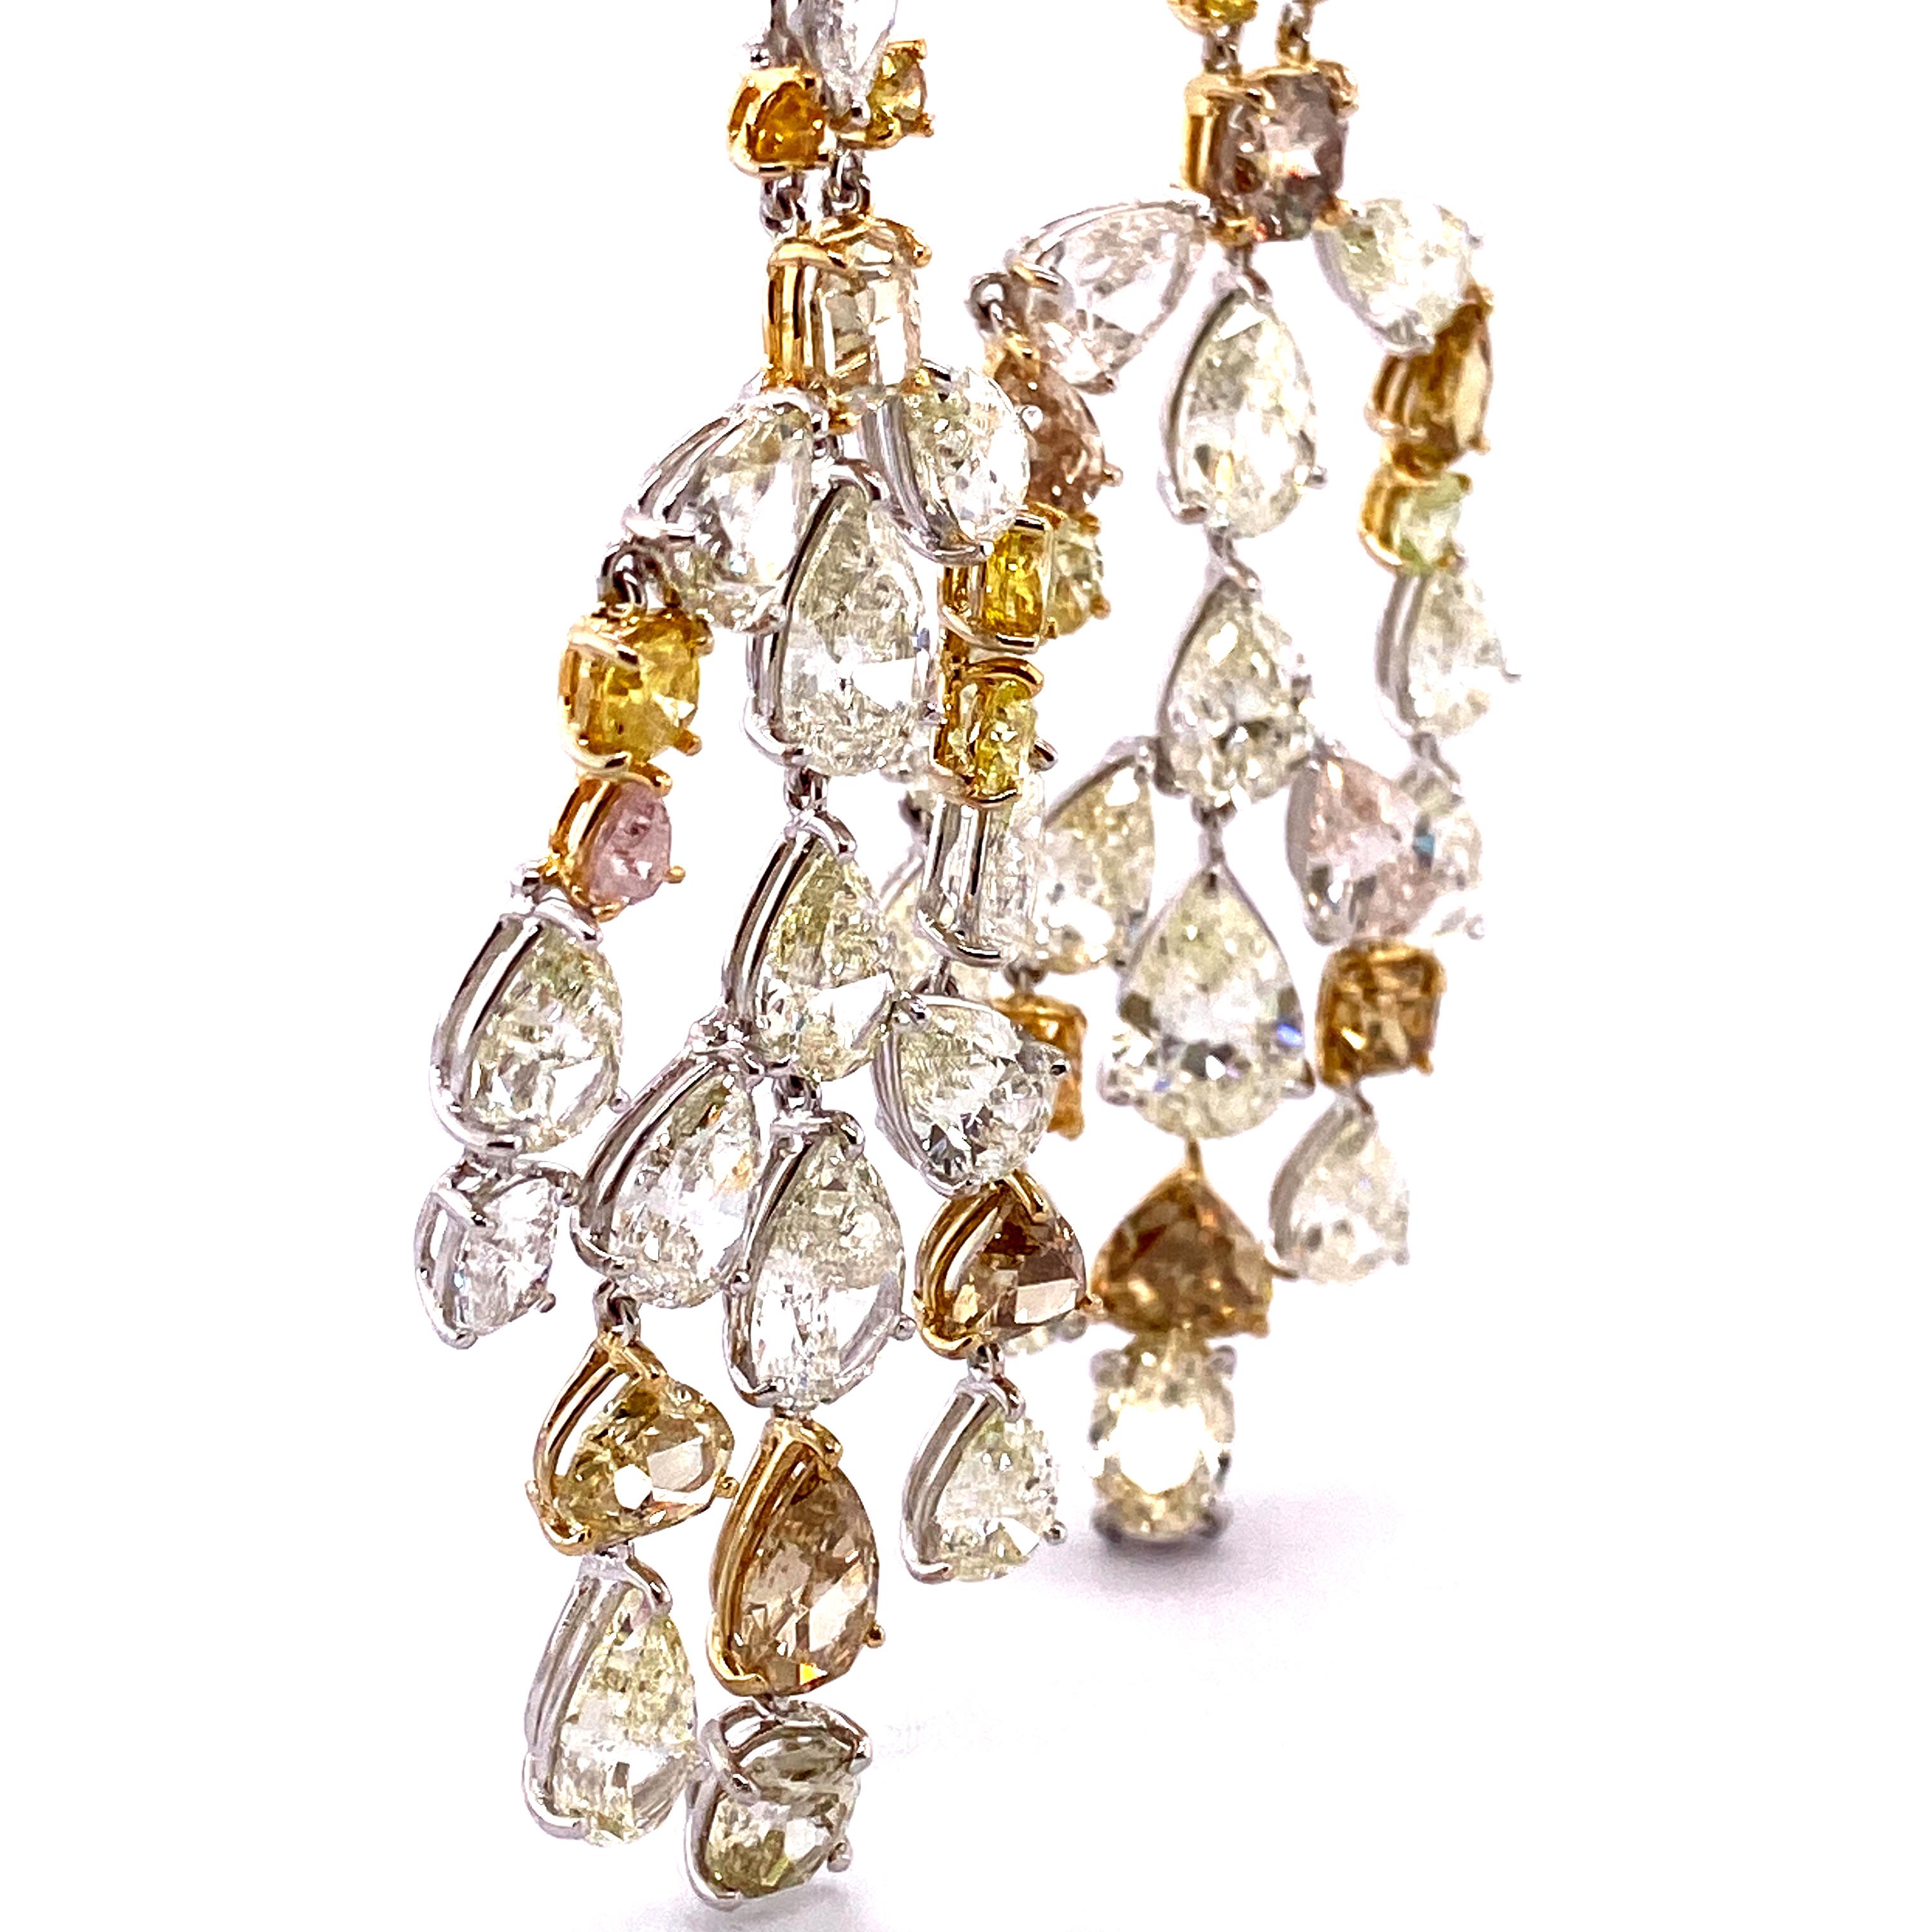 57.64 Carat Fancy Coloured Diamonds and White Diamond Chandelier Gold Earrings For Sale 2